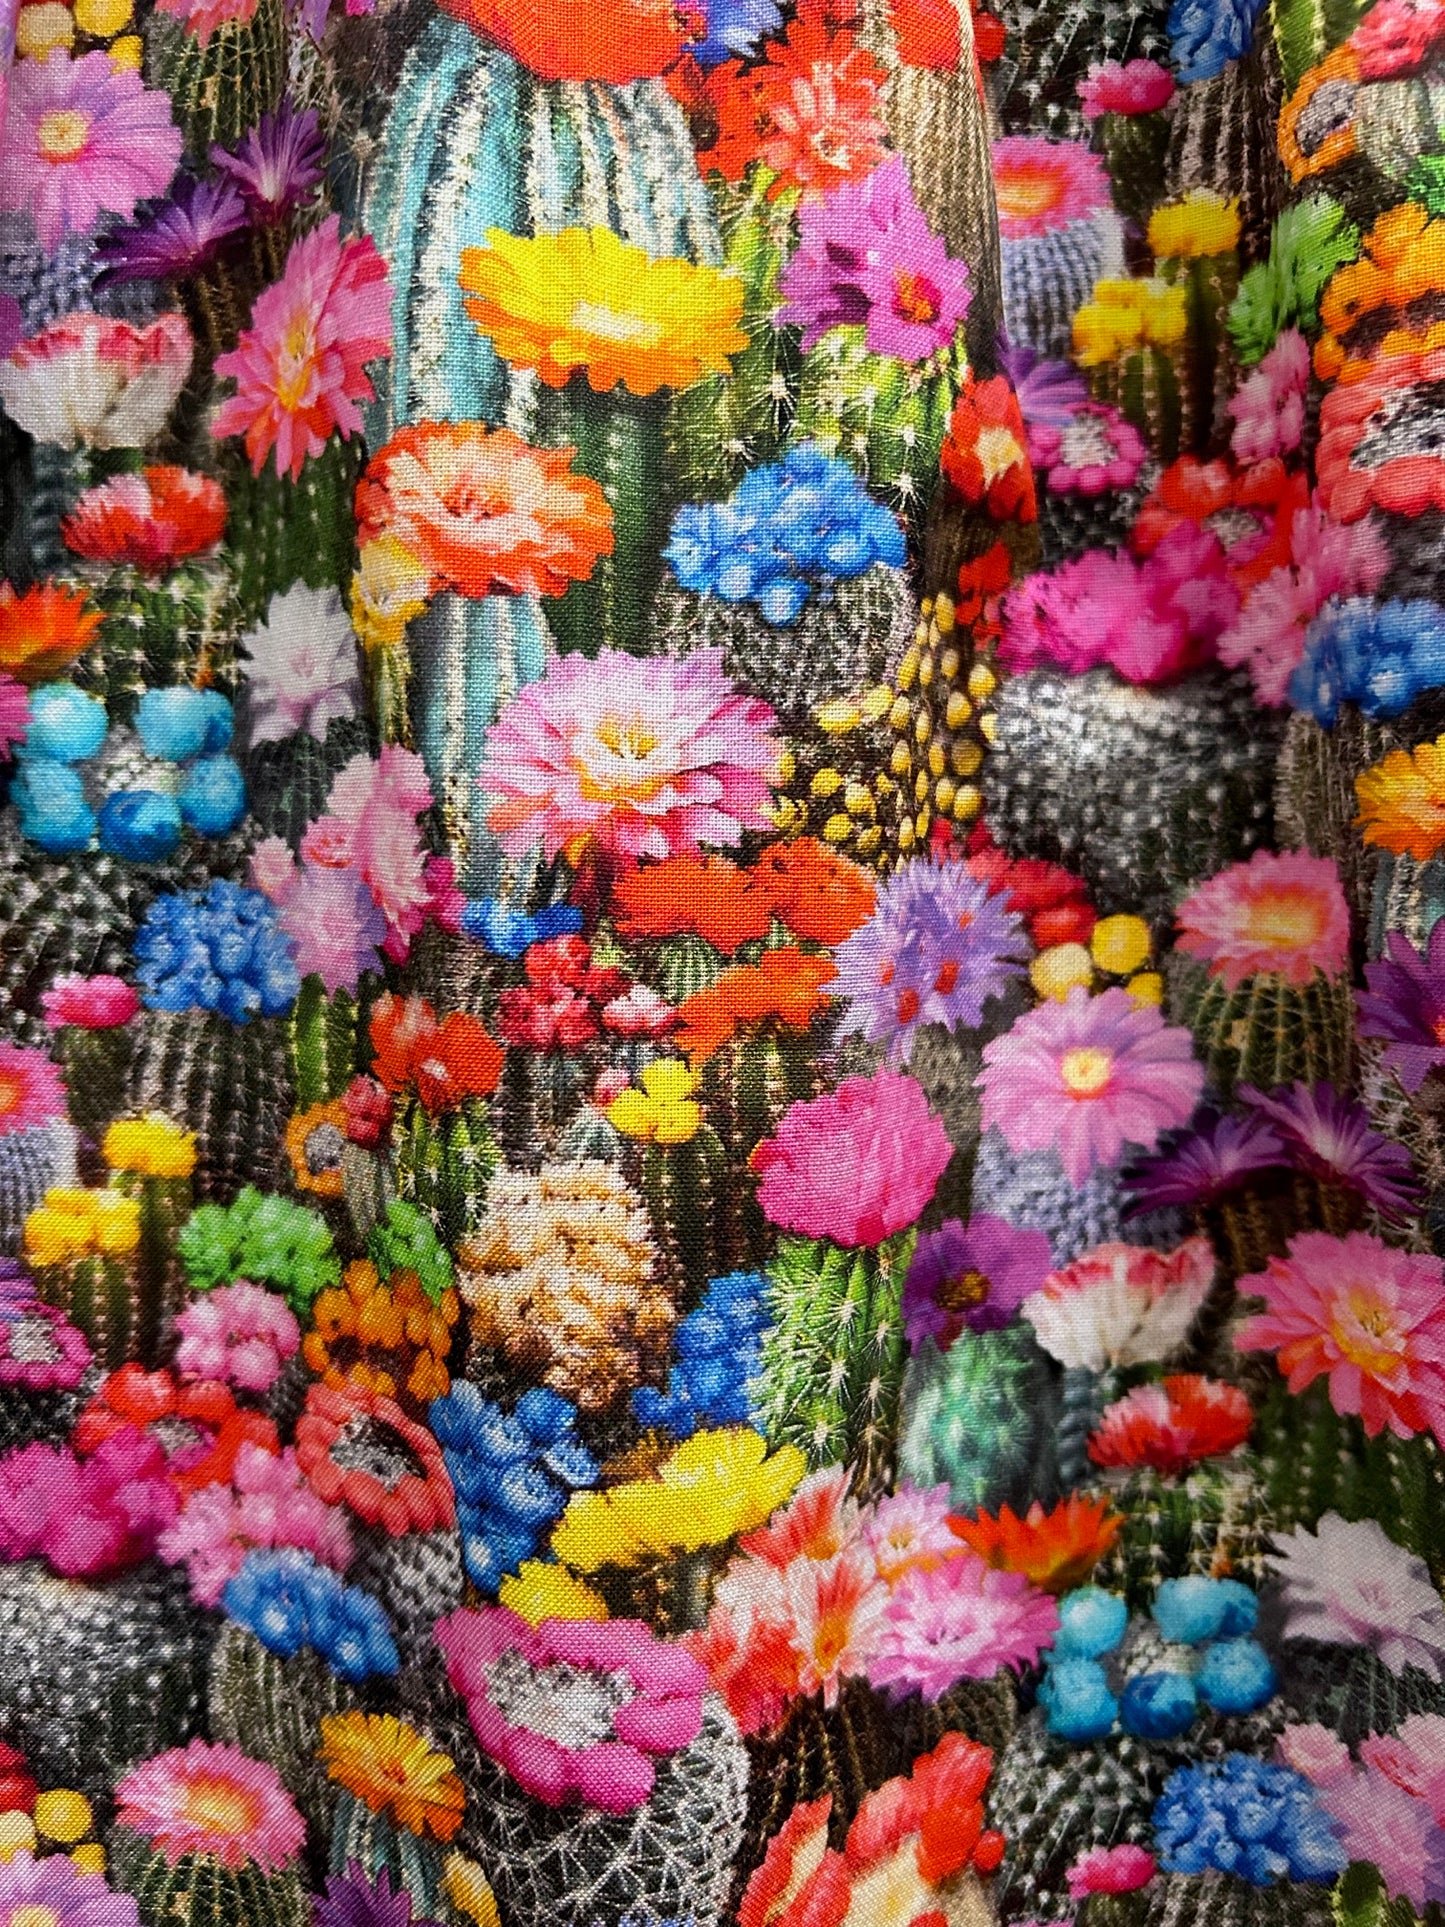 close up of the fabric showing the colorful cacti wtih flowers